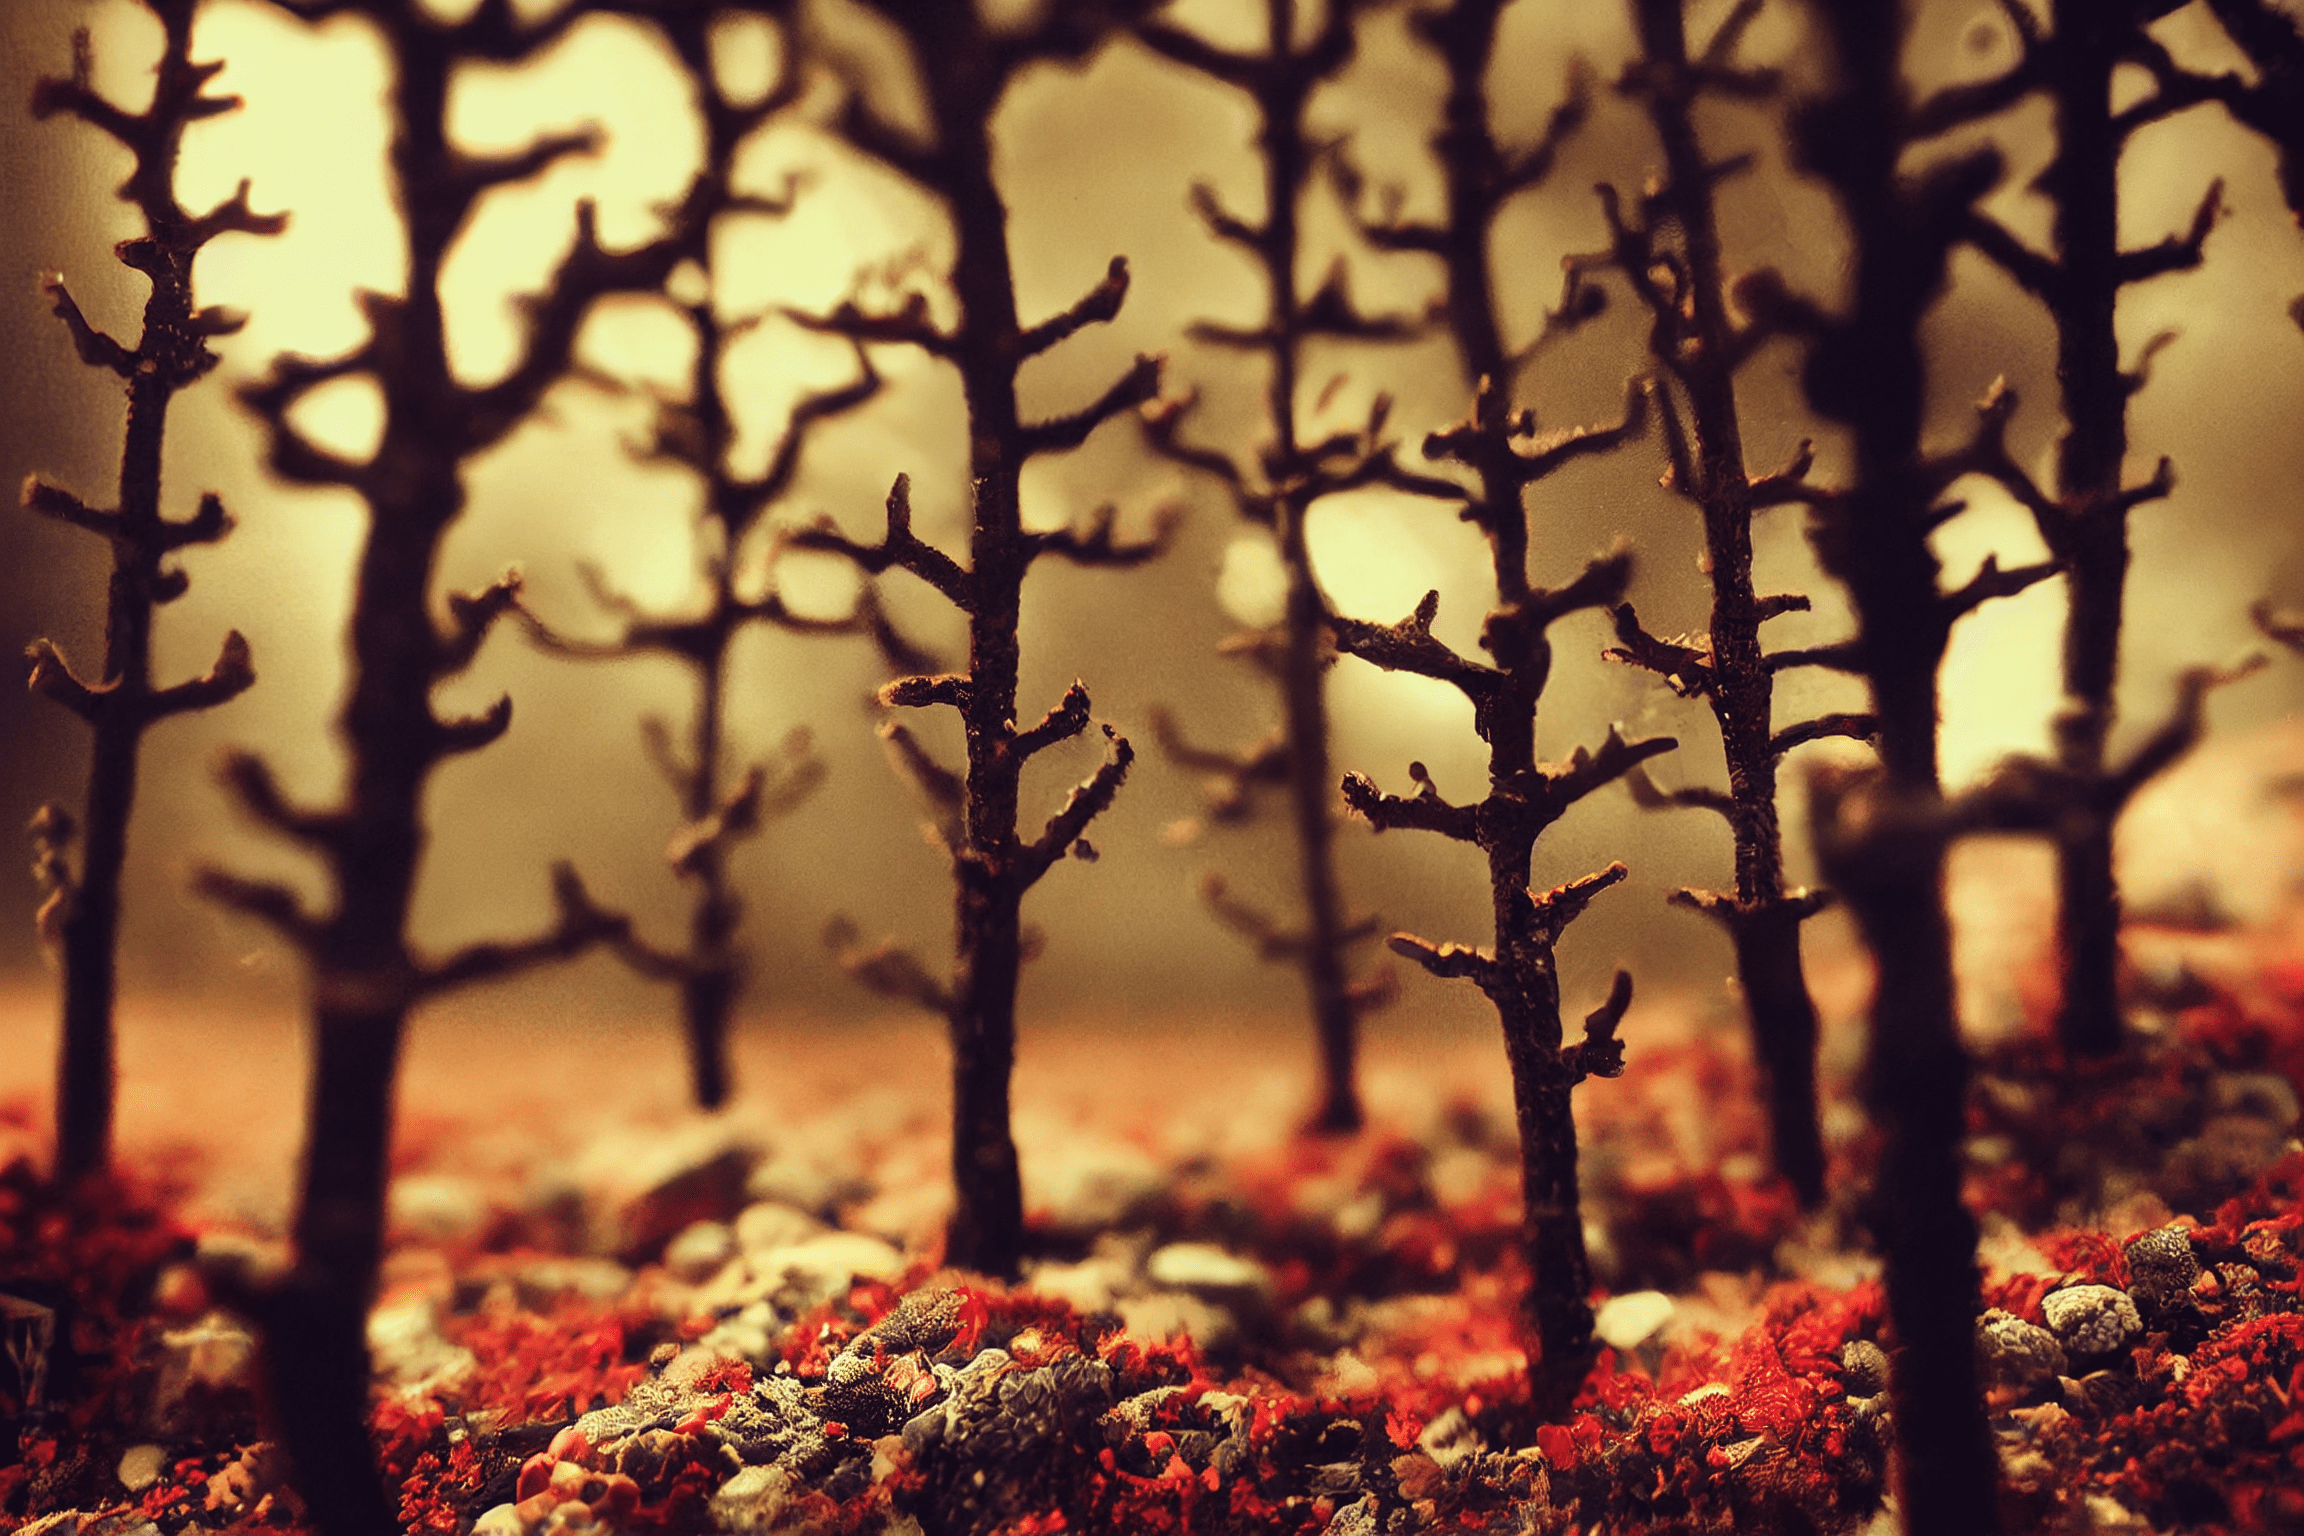 Way back a year ago – Cabincore miniature trees